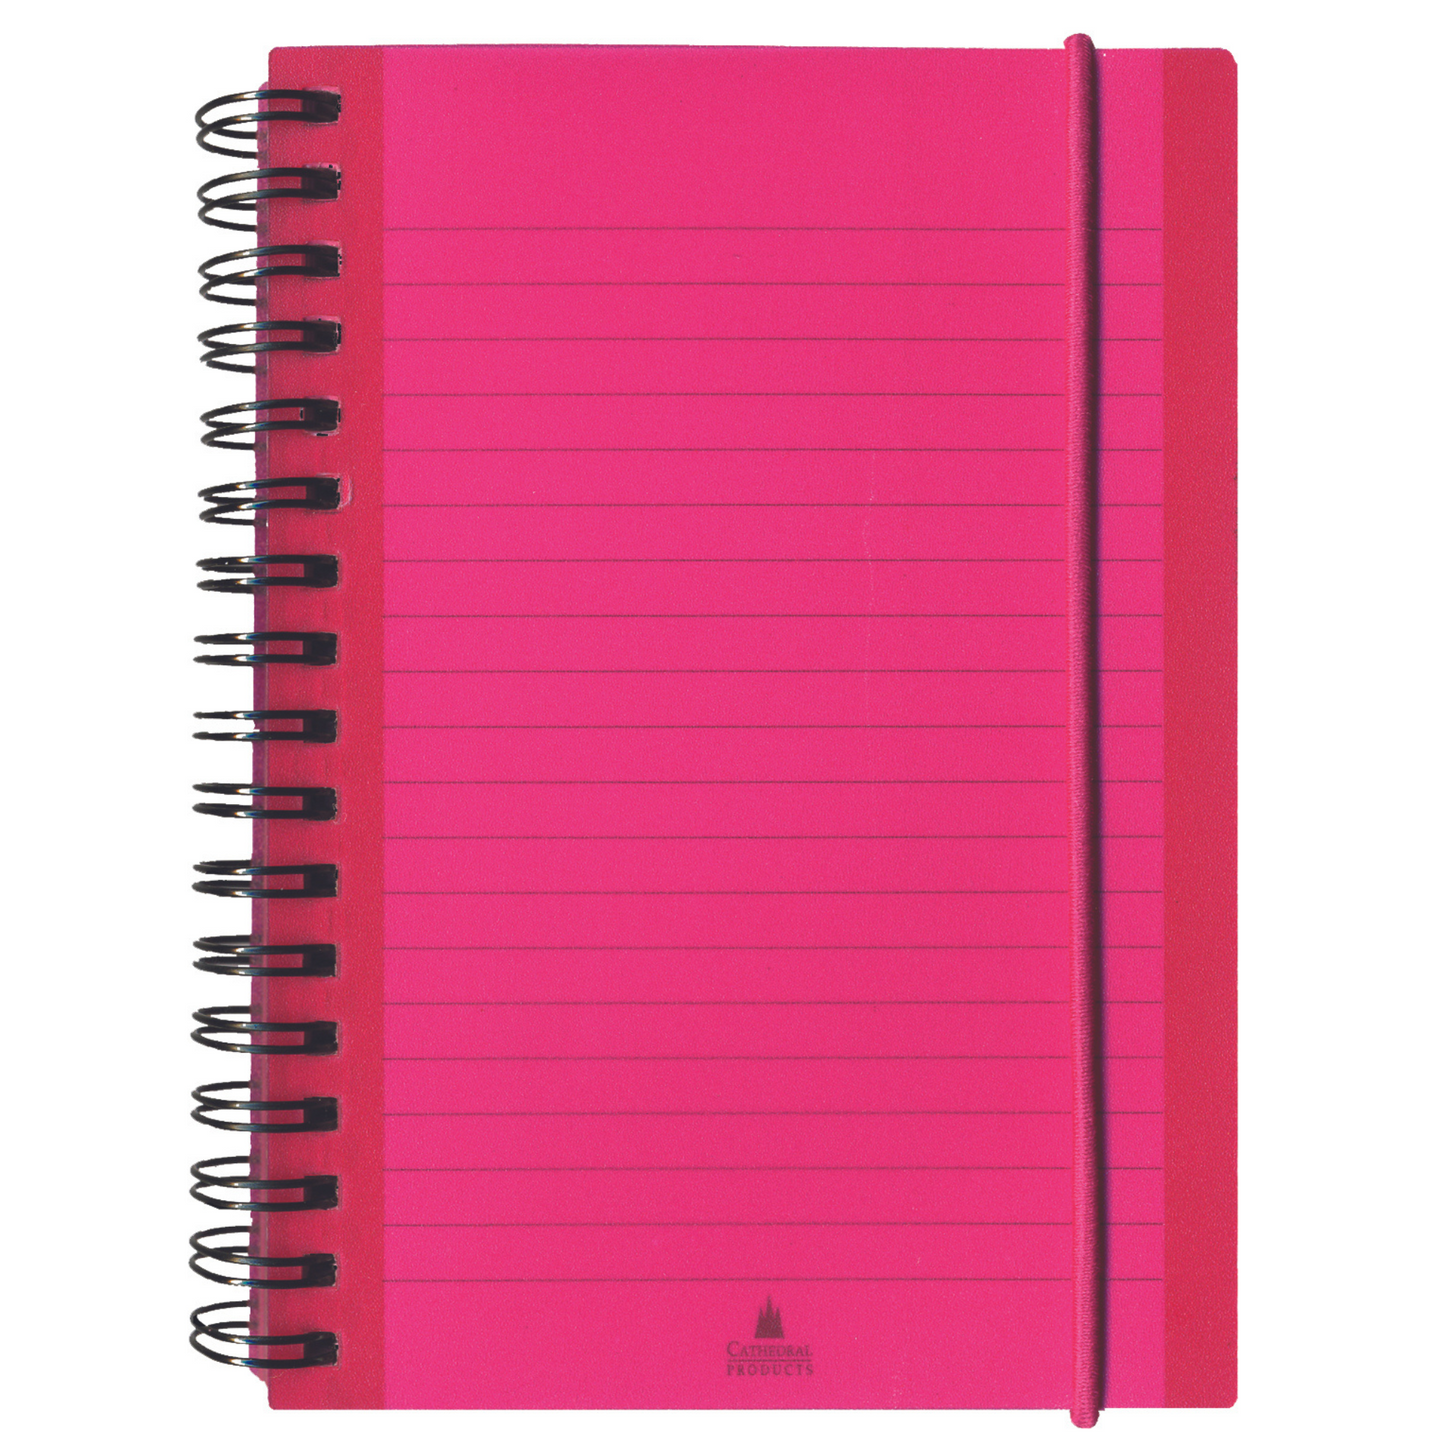 A6 Neon Notebooks - Pack of 3